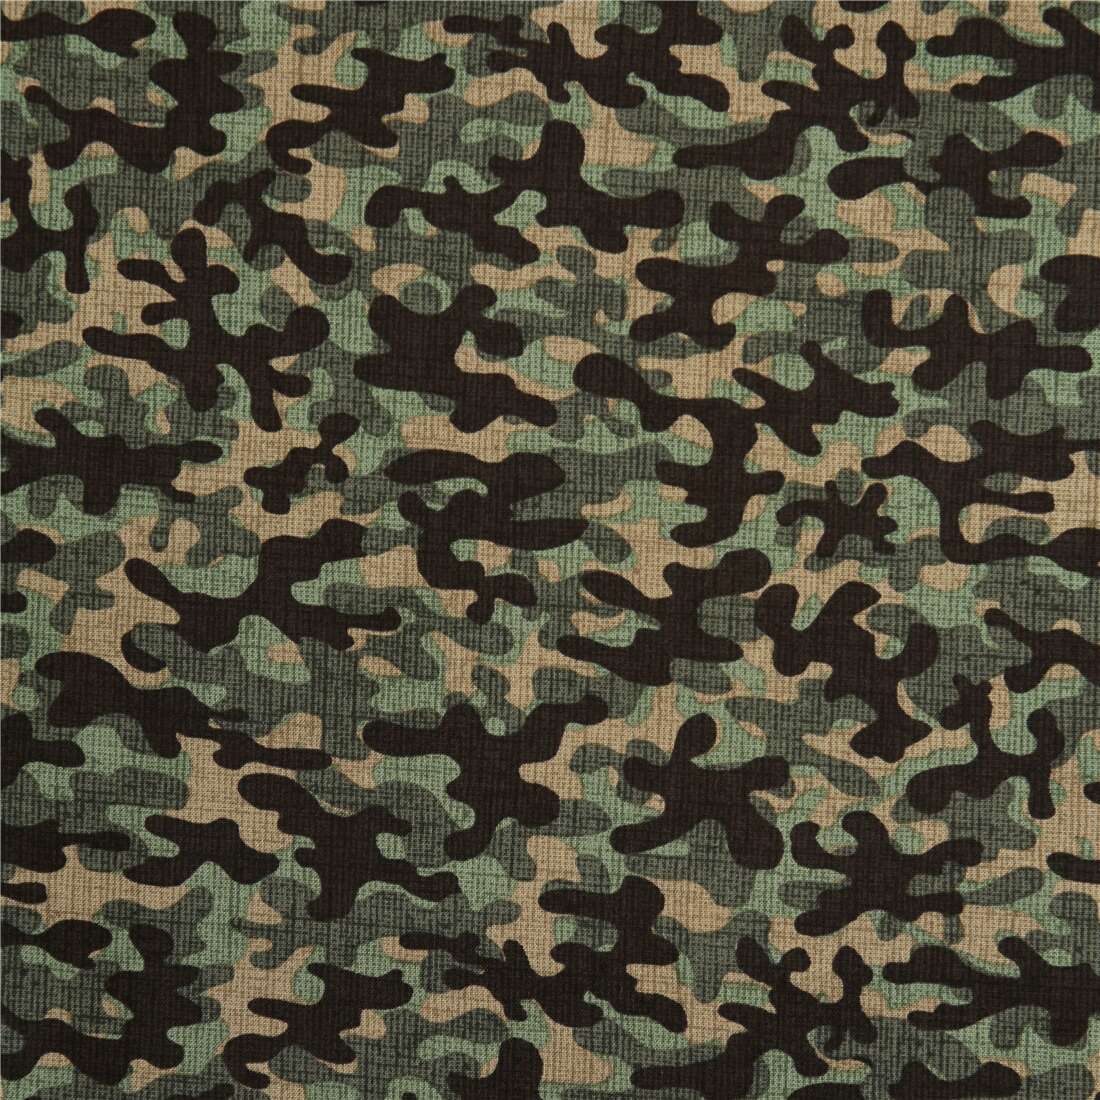 Green Brown Camouflage 